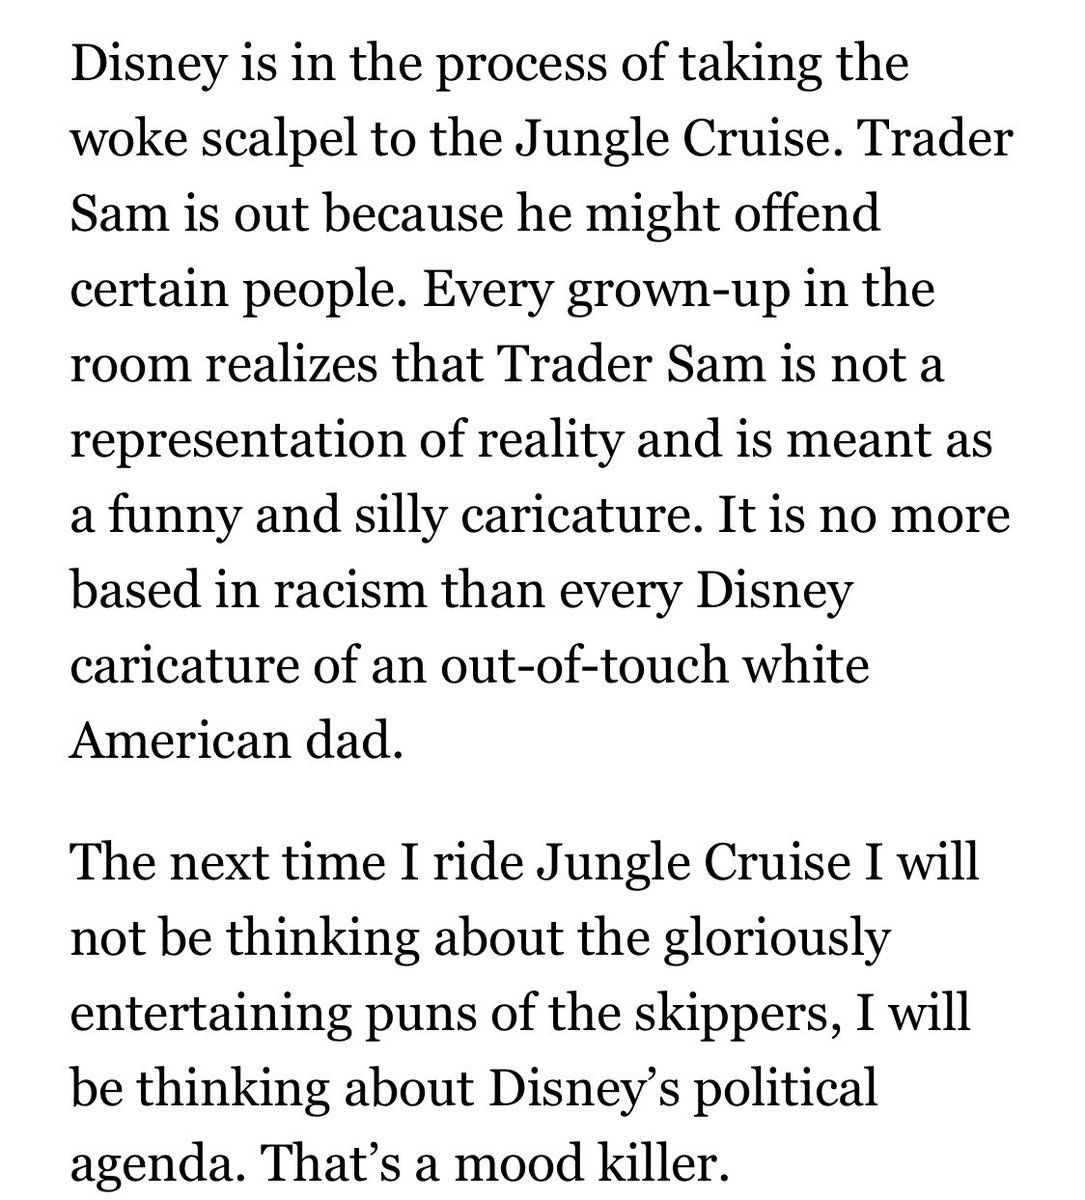 They removed Trader Sam, a grotesquely racist depiction of an African man selling shrunken heads near a group of spear-wielding African “head-hunters” with piles of human skulls at their feet. What a mood killer!